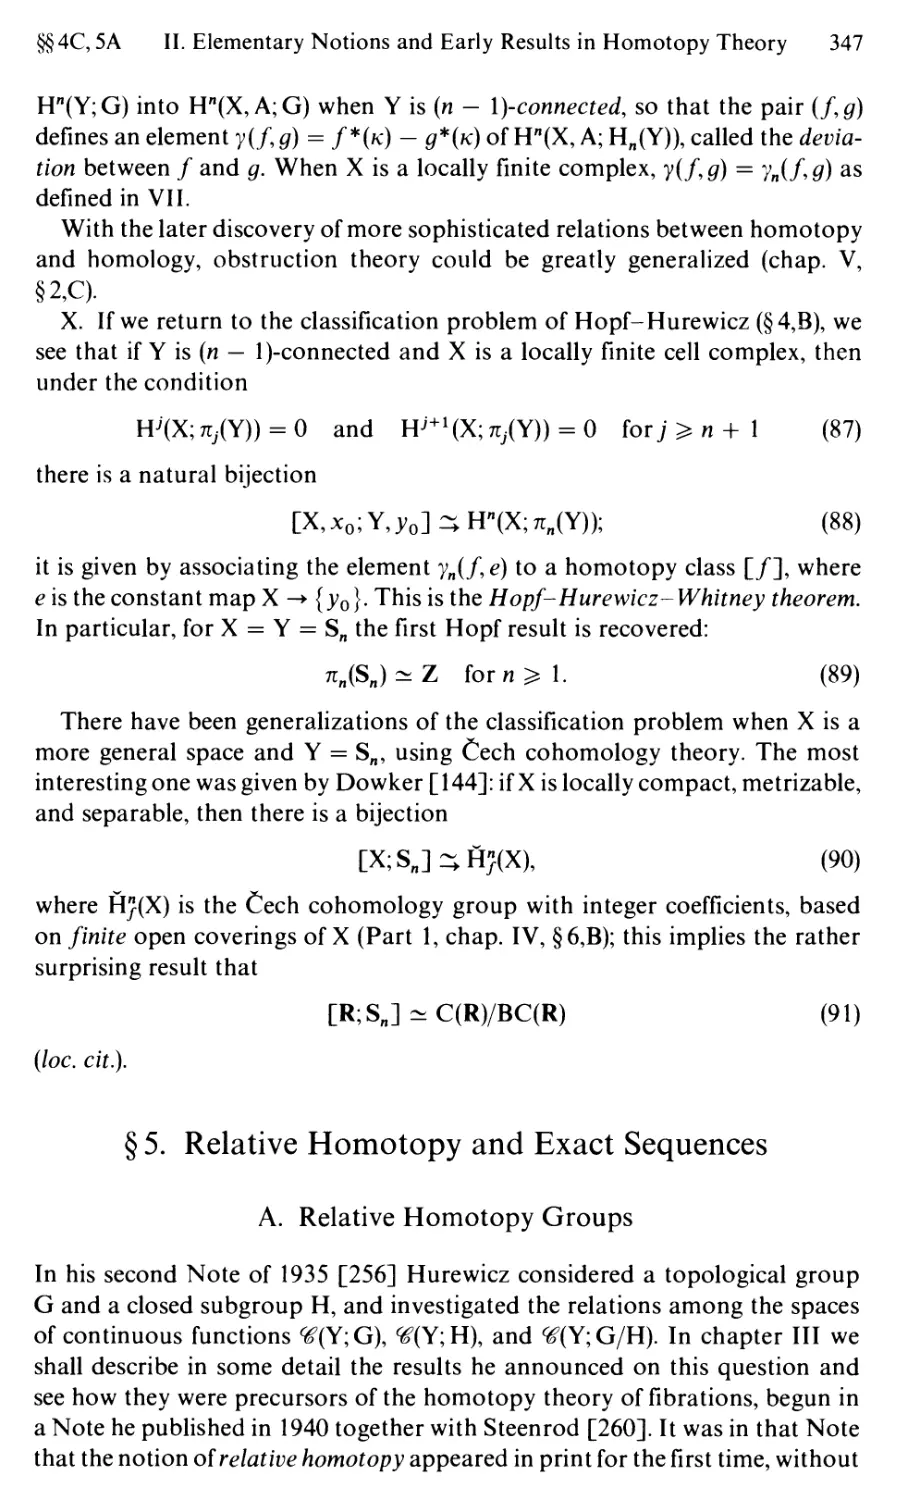 §5. Relative Homotopy and Exact Sequences